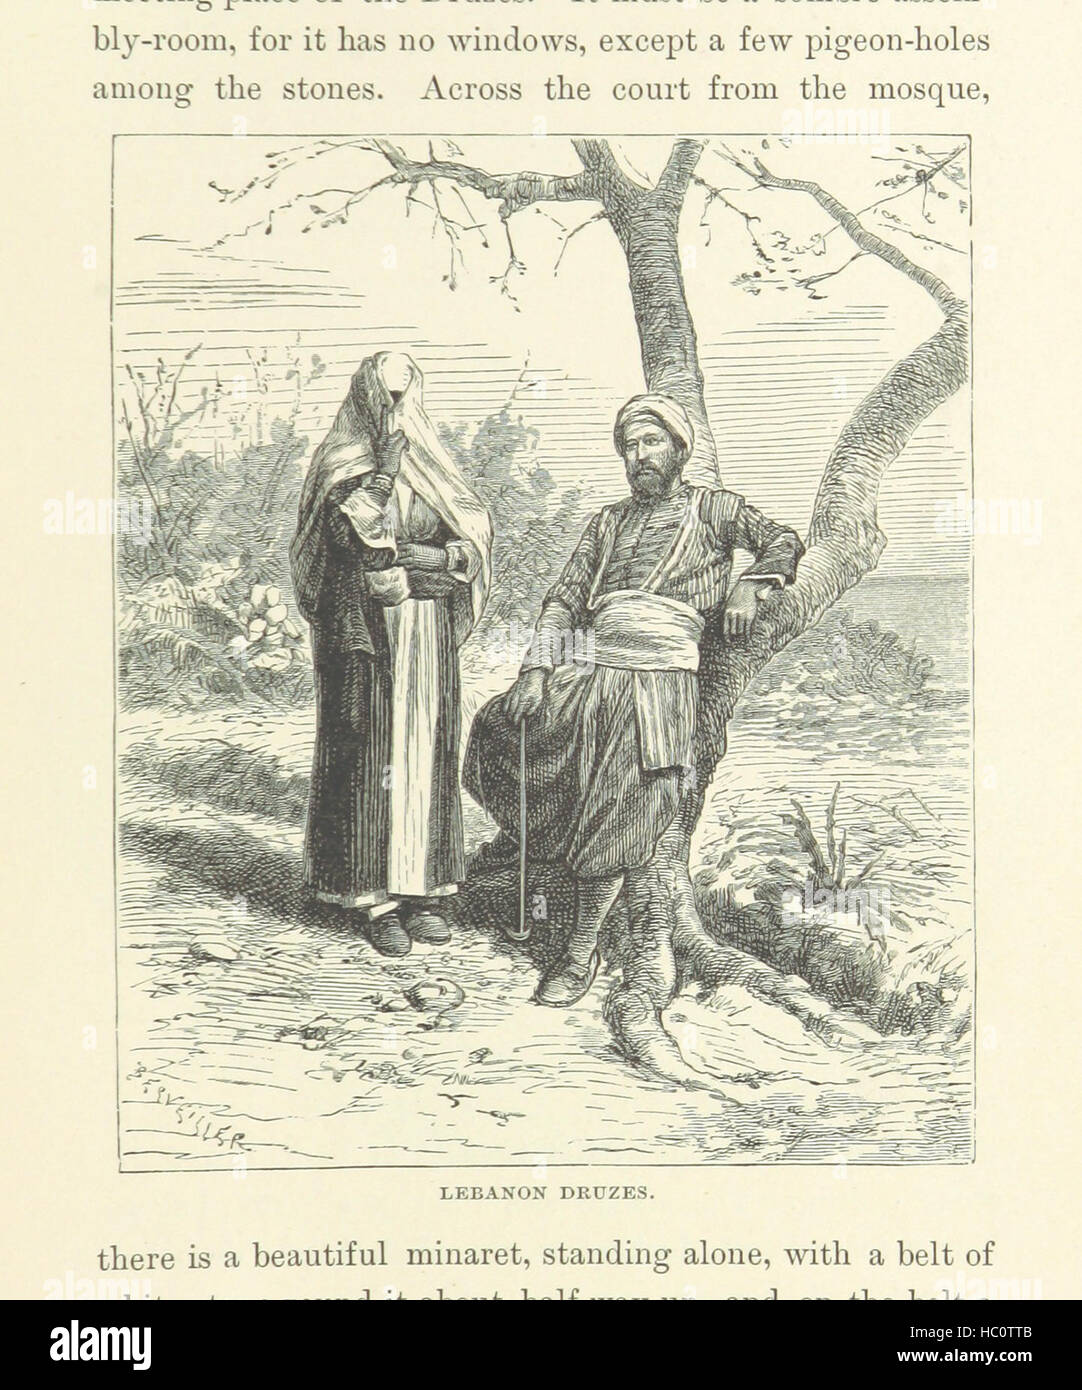 Image taken from page 391 of 'An Account of Palmyra and Zenobia, with travels and adventures in Bashan and the desert ... With eighty illustrations and thirty-two full-page engravings' Image taken from page 391 of 'An Account of Palmyra Stock Photo